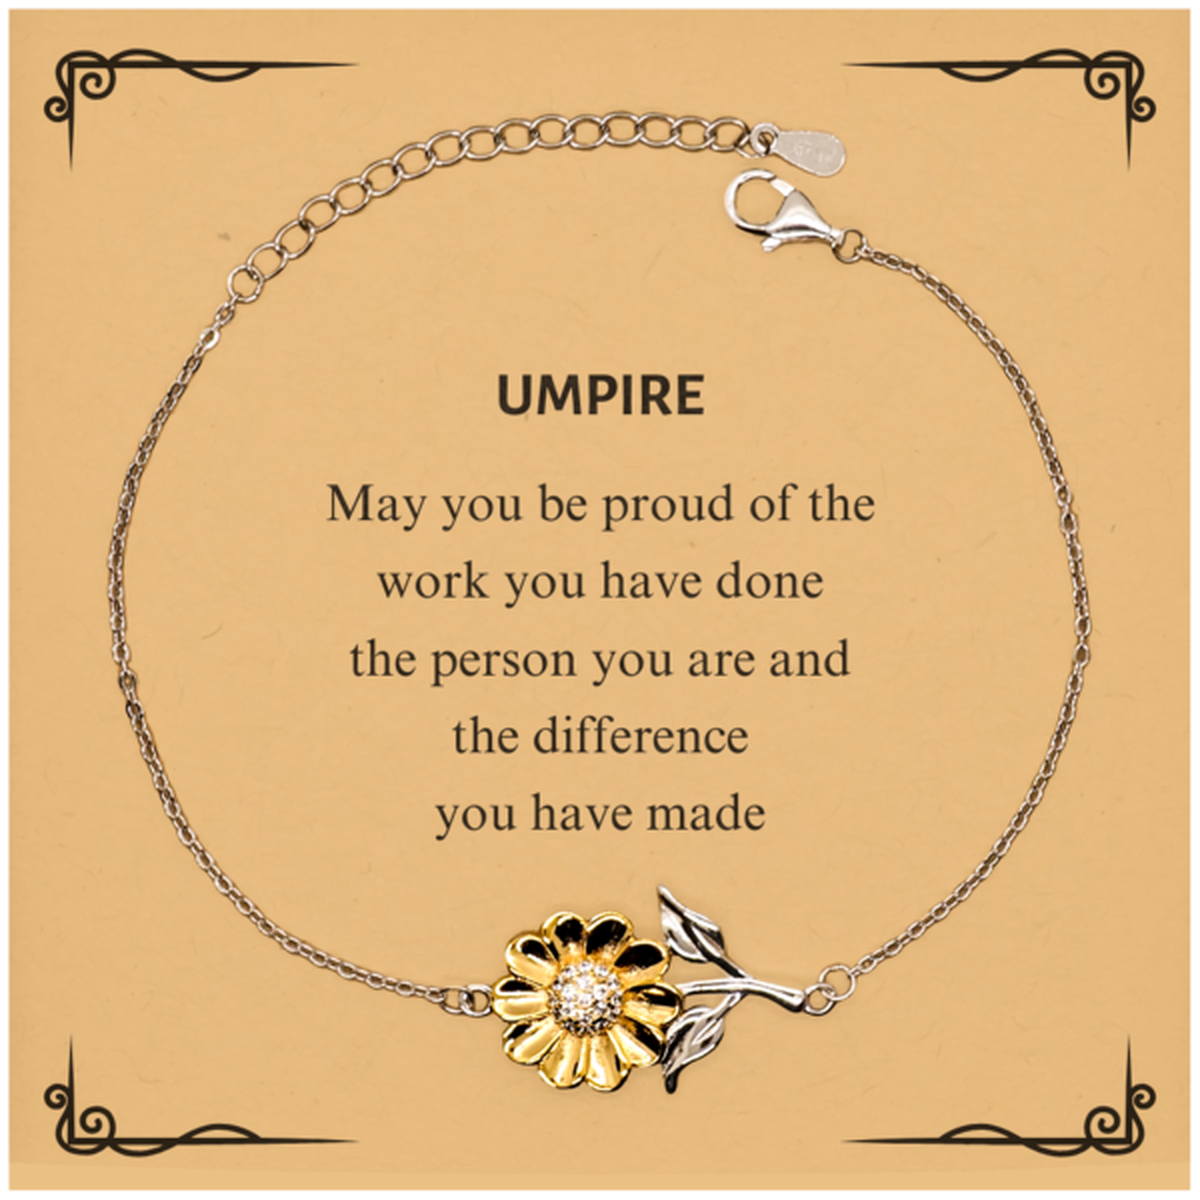 Umpire May you be proud of the work you have done, Retirement Umpire Sunflower Bracelet for Colleague Appreciation Gifts Amazing for Umpire